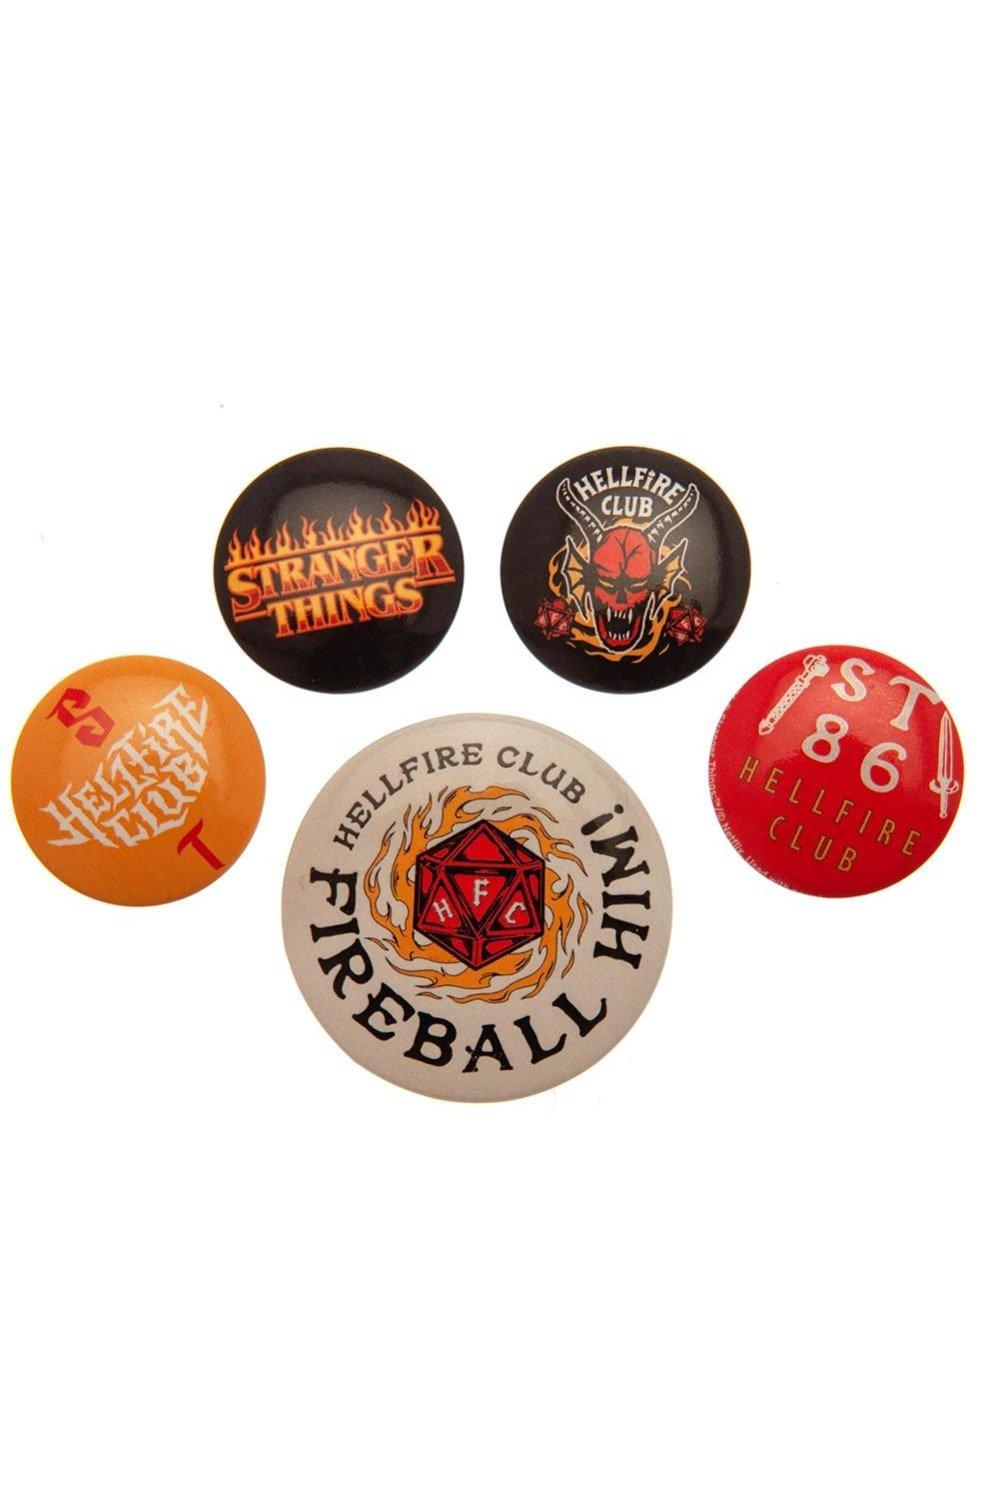 Hellfire Club Button Badge Set (Pack of 5)